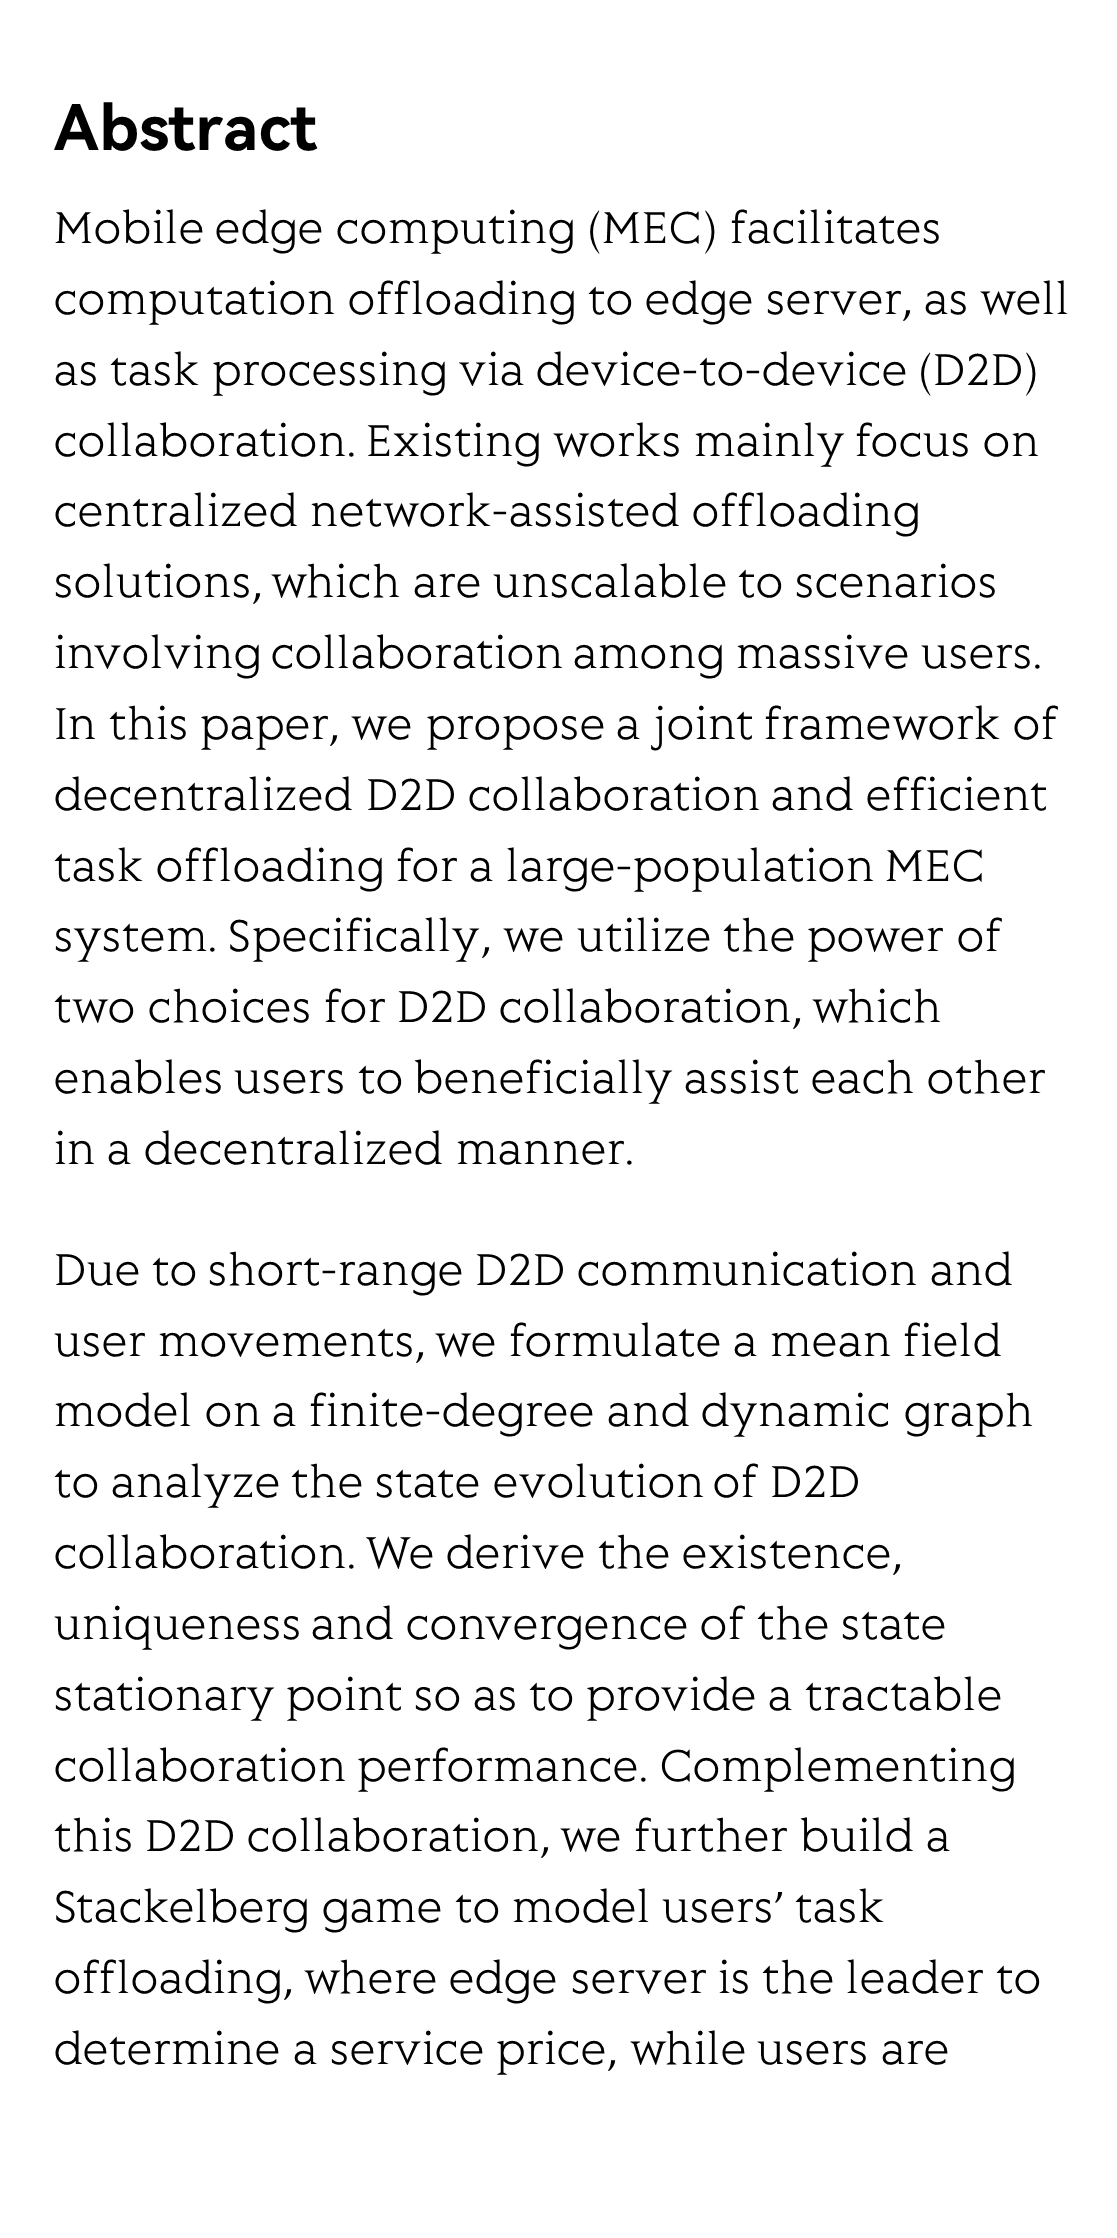 Joint D2D Collaboration and Task Offloading for Edge Computing: A Mean Field Graph Approach_2